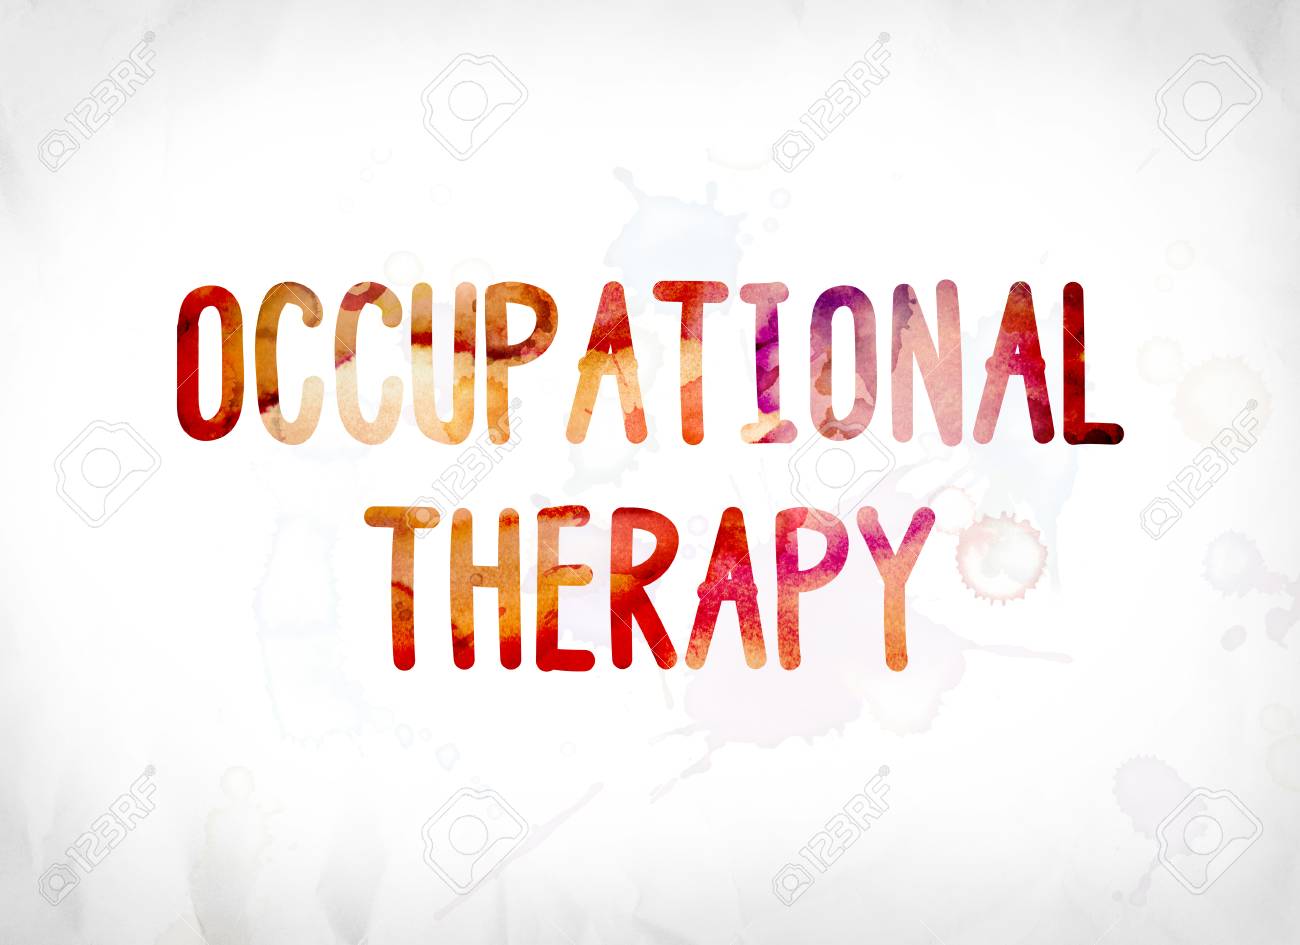 The Words Occupational Therapy Concept And Theme Painted In